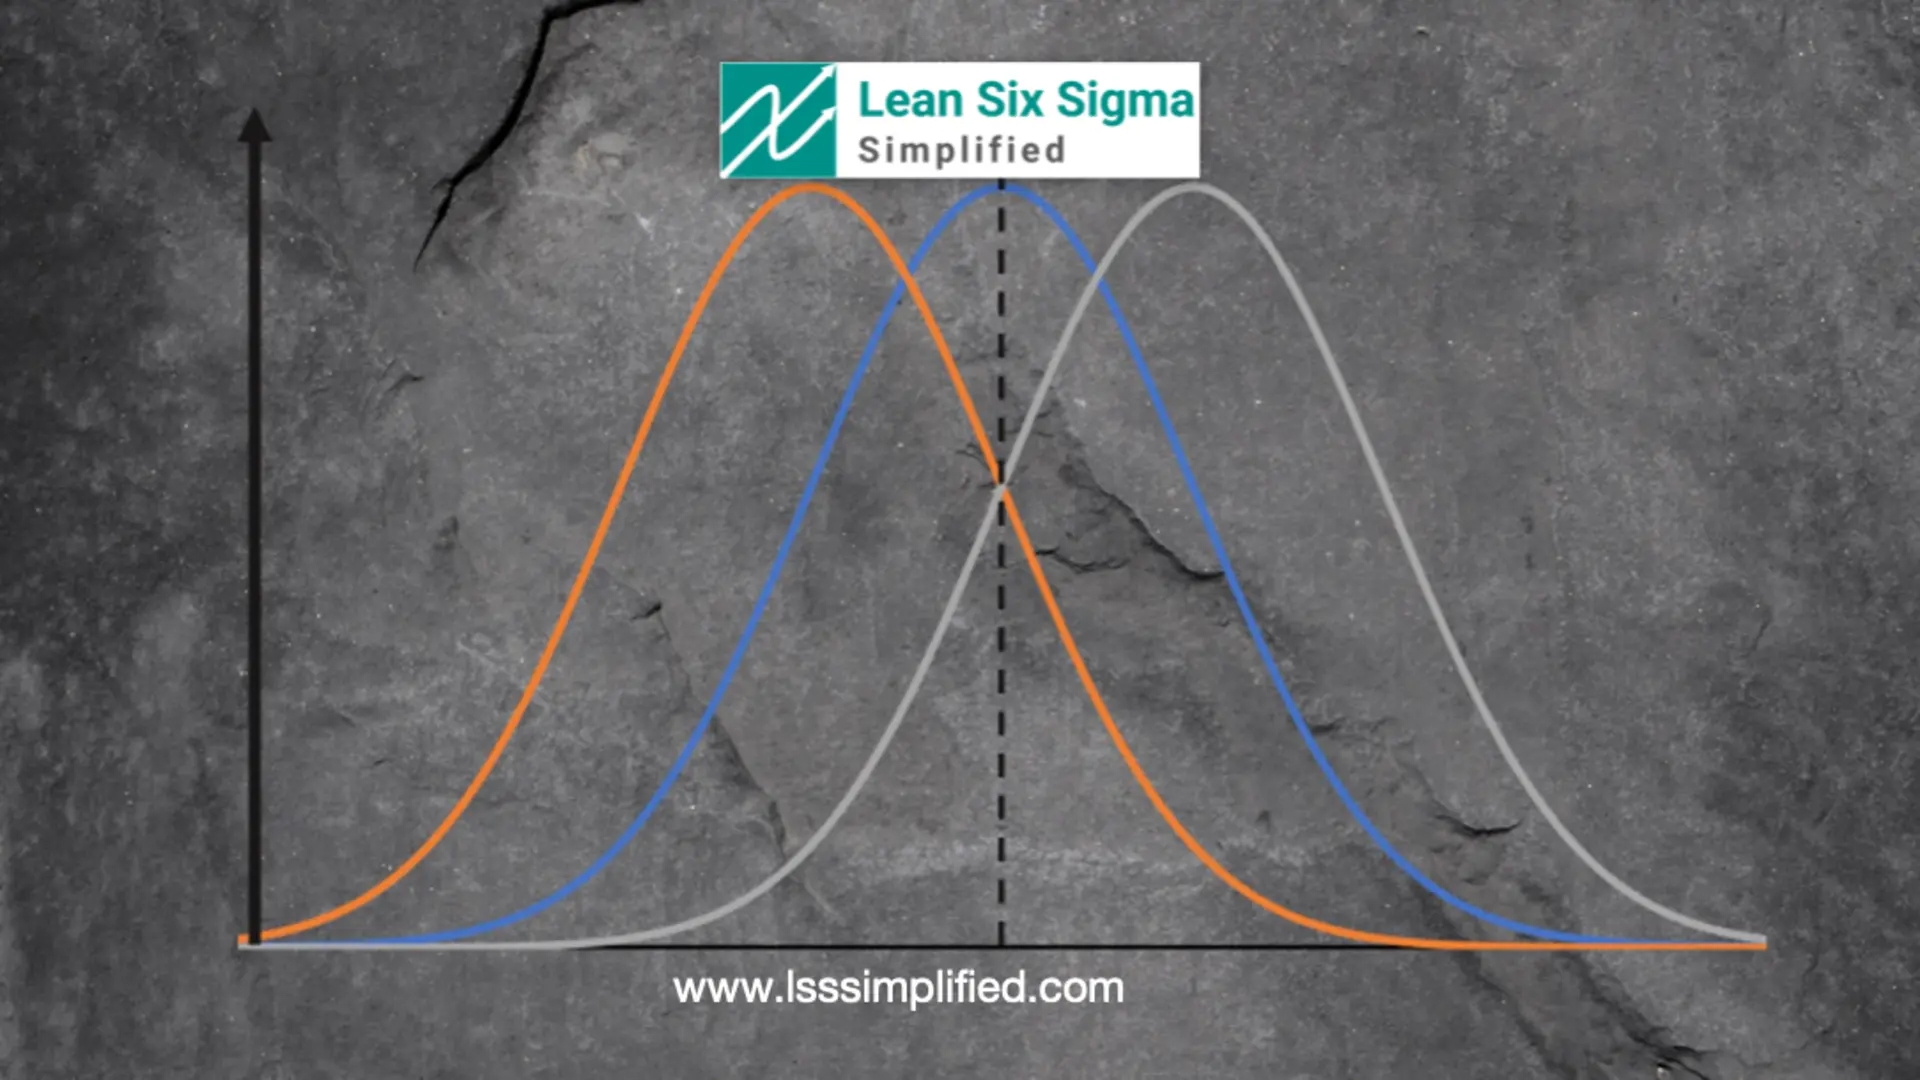 Normal Distribution for Lean Six Sigma